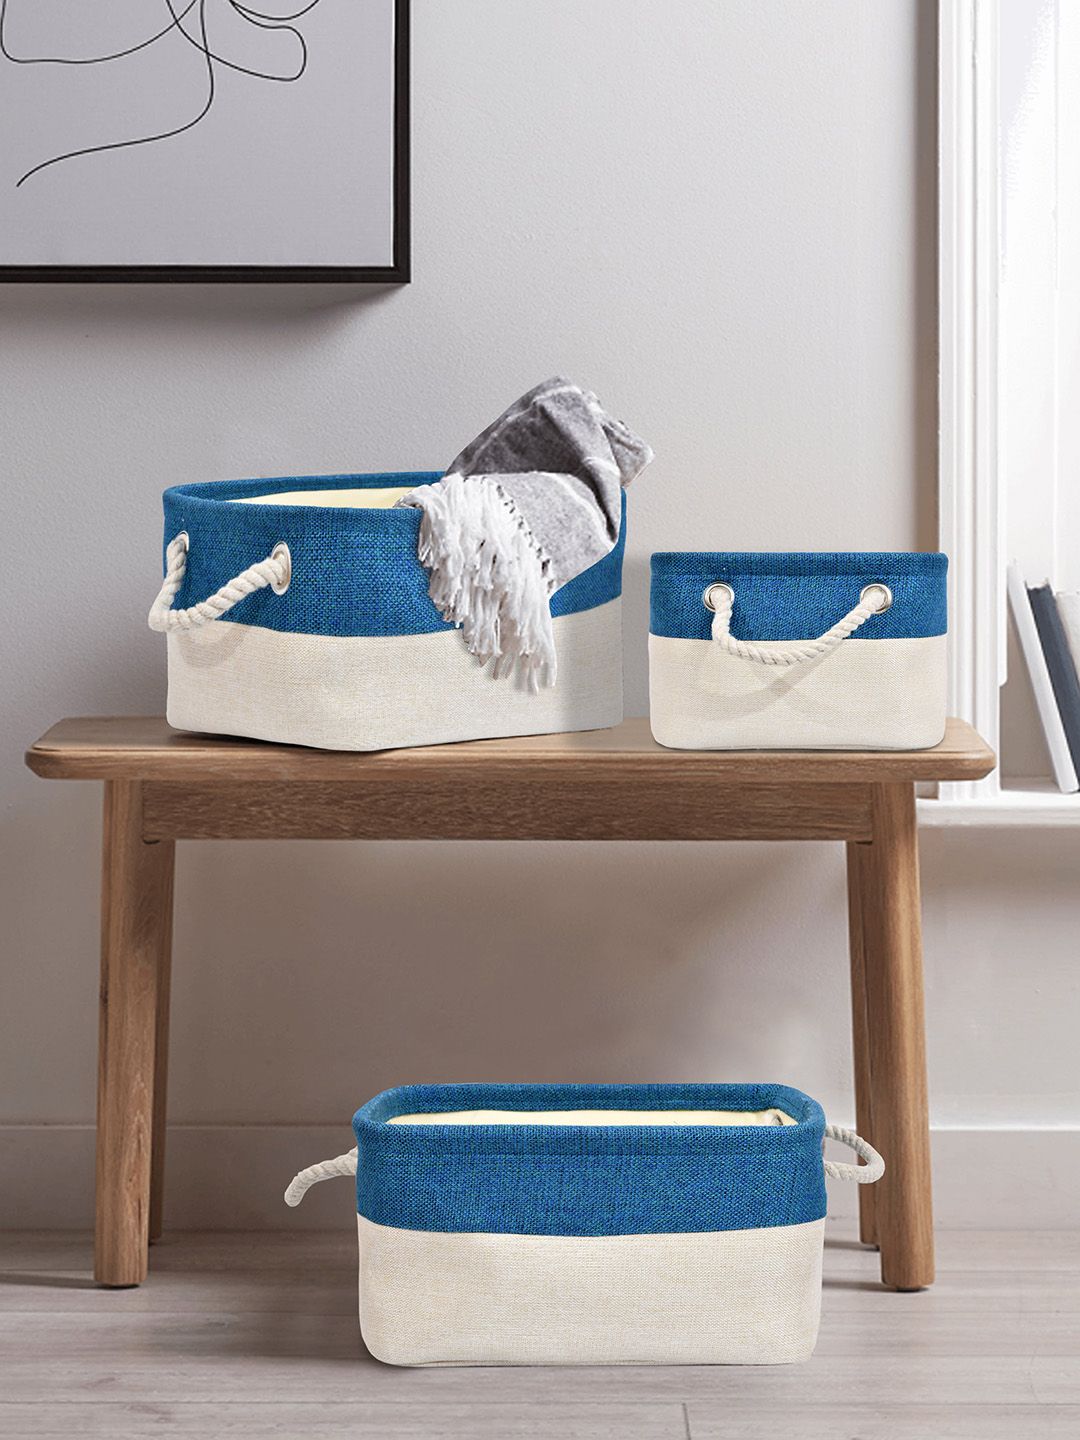 Clasiko Set Of 3 Off White & Blue Colourblocked  Handcrafted Eco-Friendly Baskets Organizers Price in India